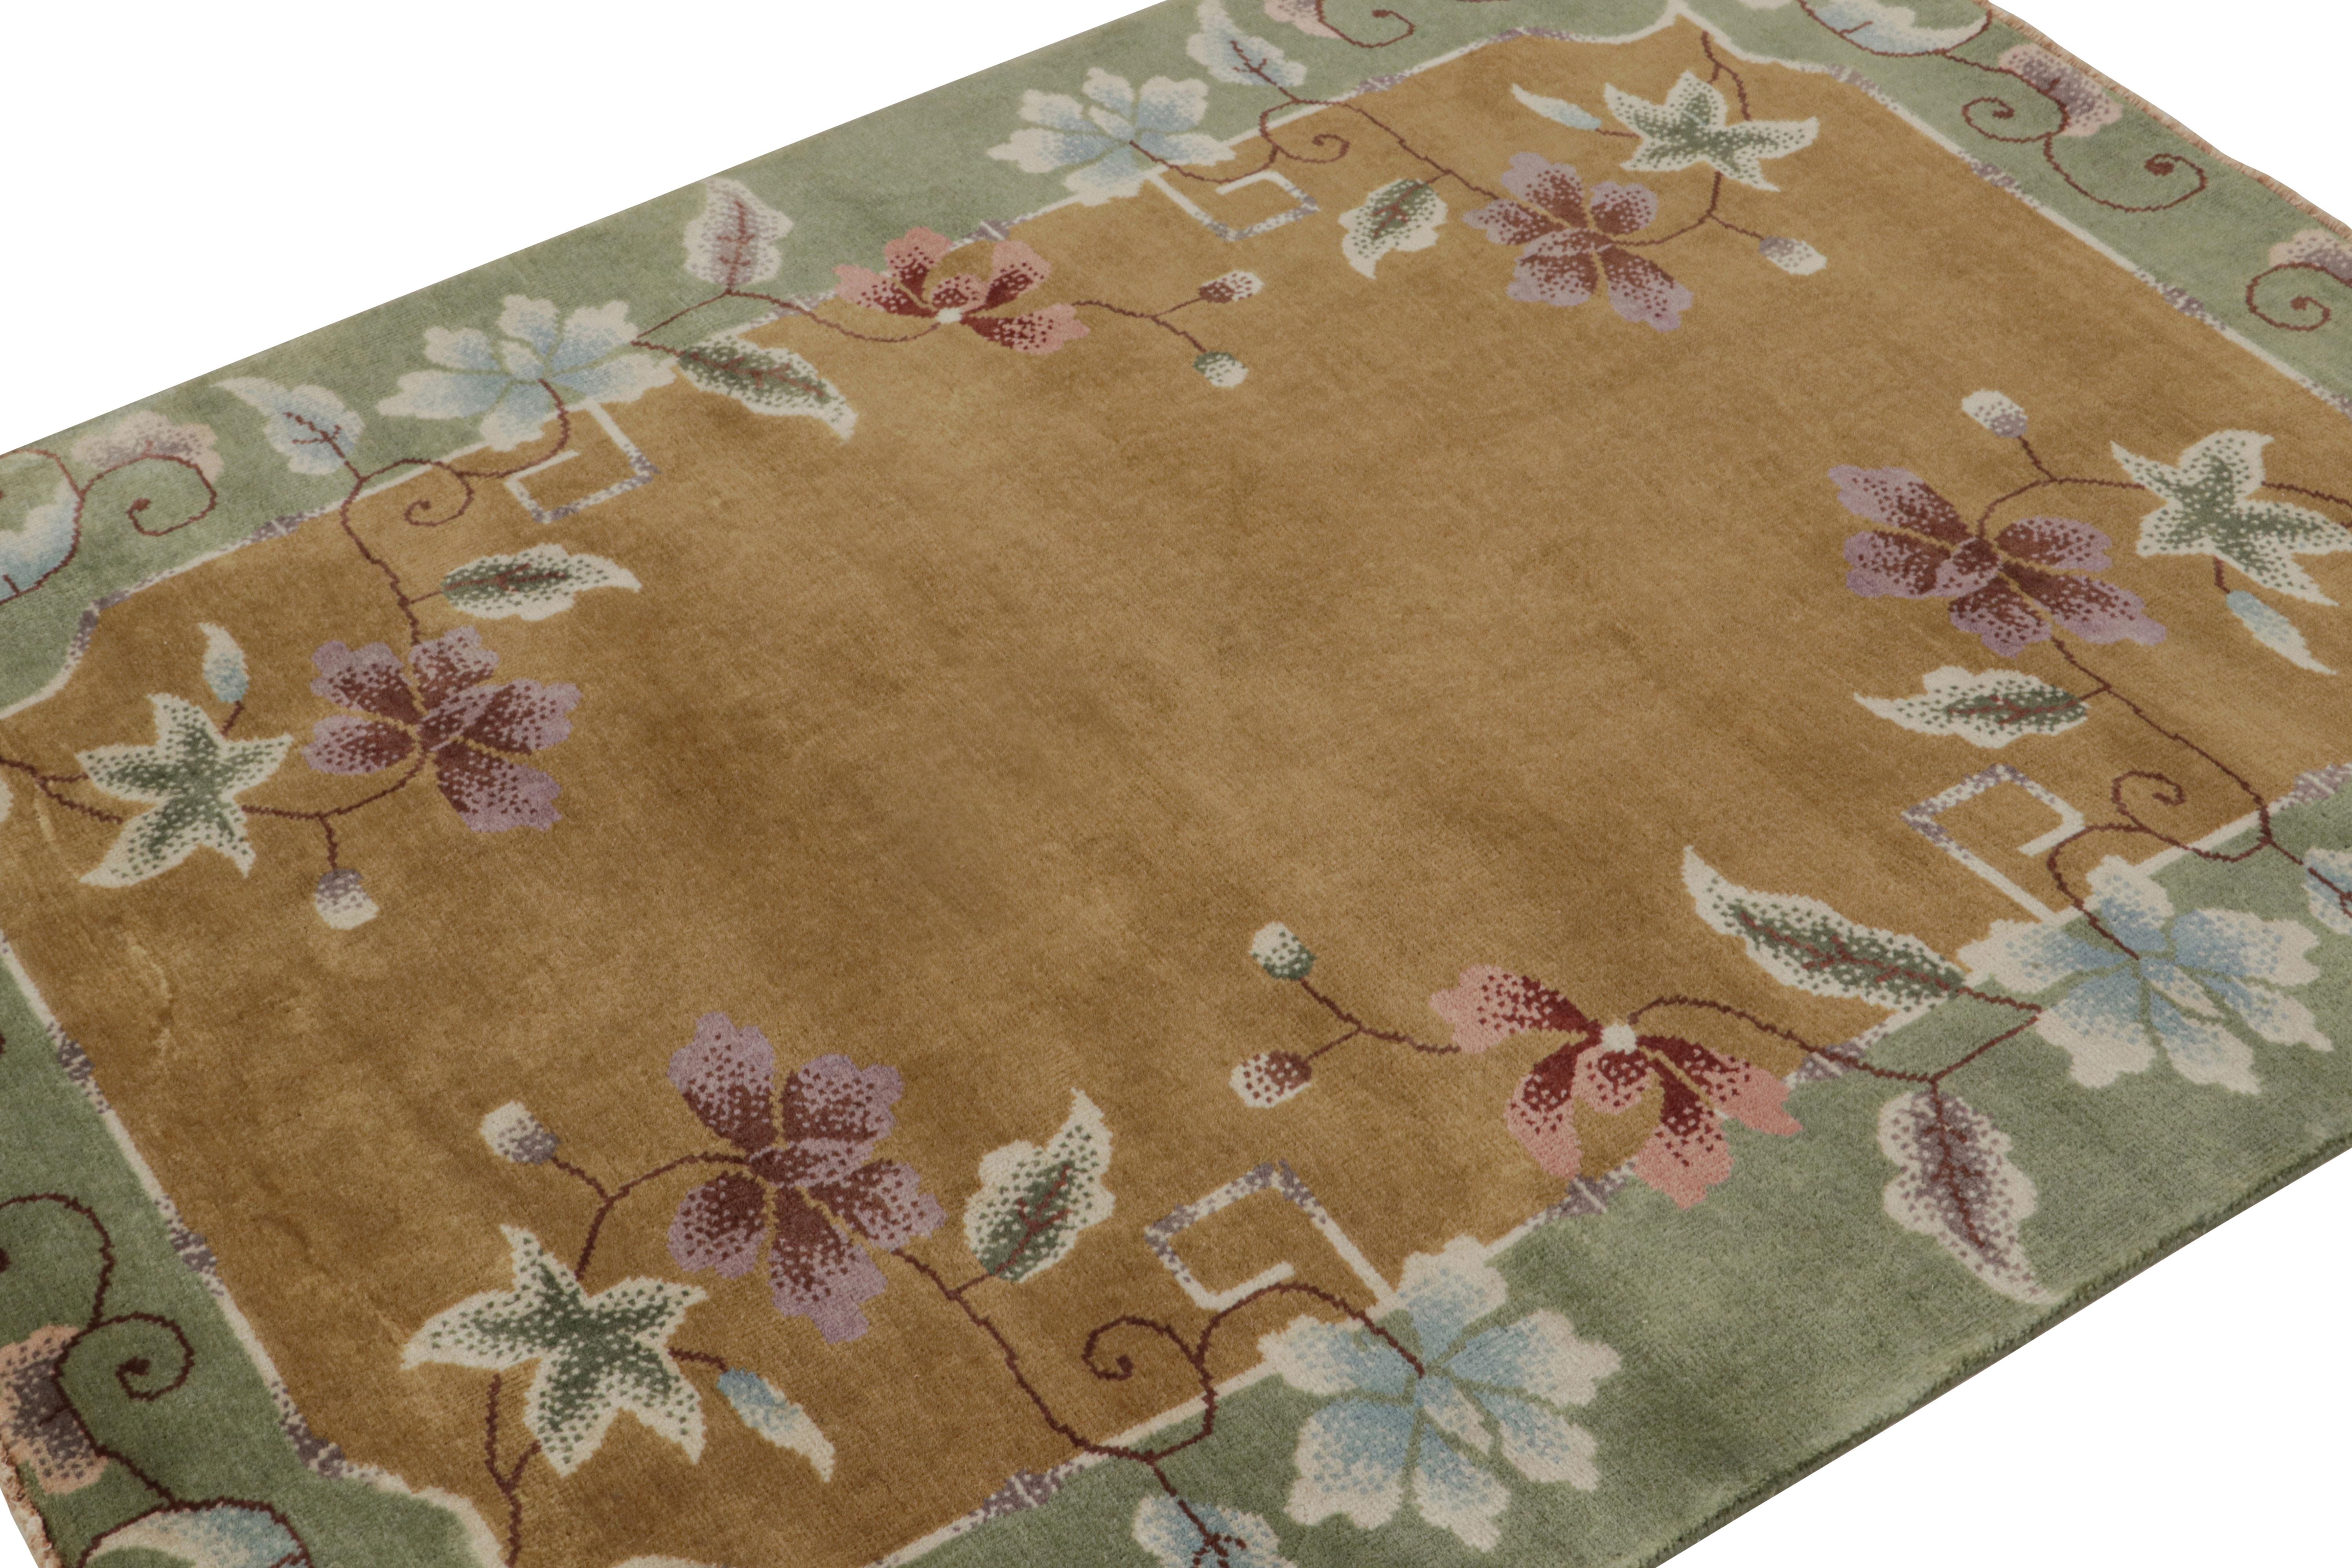 Hand-knotted in wool, this 4×5 rug by Rug & Kilim is a new addition to their Chinese Art Deco rug line.

On the Design:

The rug enjoys a golden-brown open field with green borders marrying floral patterns in light blue and pink tones. Admirers of